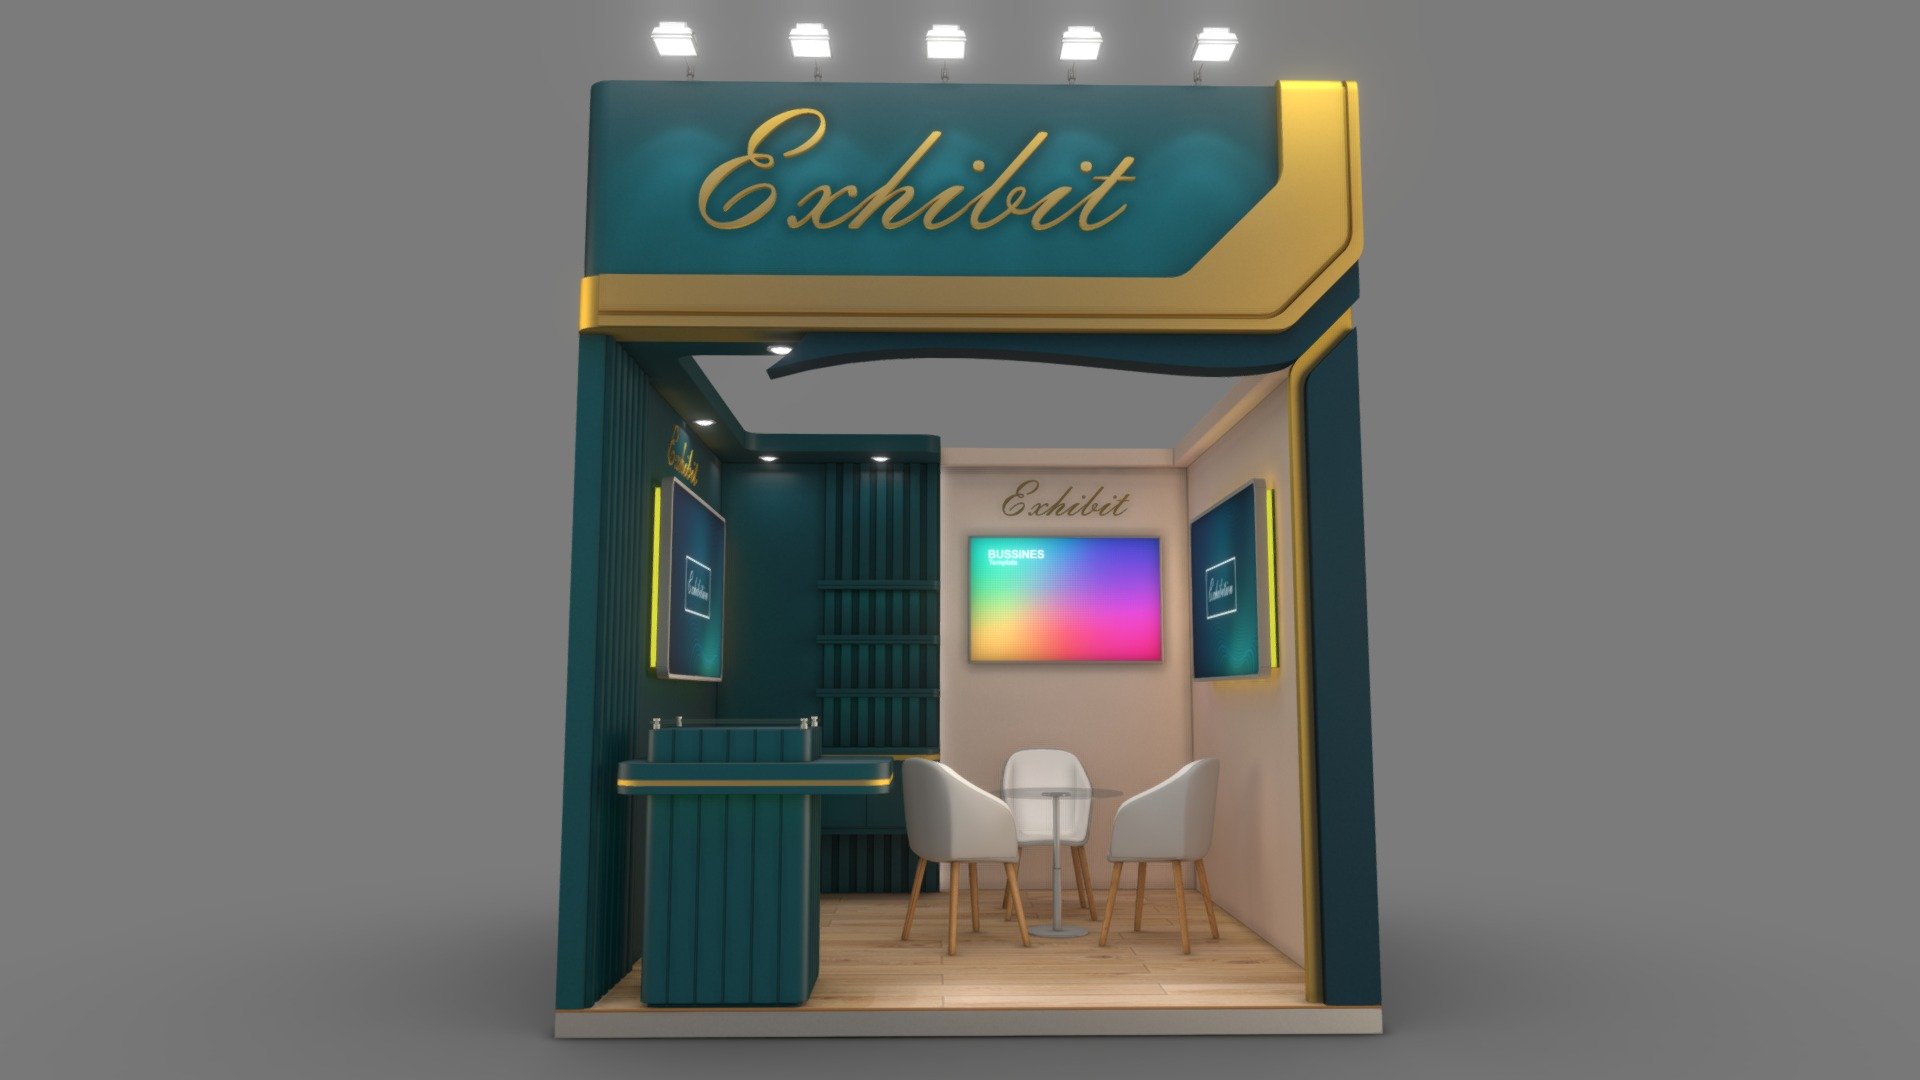 Exhibition Booth 3D Model

Layout: 9 Sqm - 1 Exposed sides - max height: 3,6m

Unit: cm

3D model Format:





Model_2301_3Ds max 2020 / Vray 5




Model_2301_3Ds max 2017 / Default Render




Model_2301_Fbx Standard map




Model_2301_Fbx V ray complete map




Model_2301_Obj Standard map




Model_2301_Obj V ray complete map



thank you for visiting

If you are interested in other models, please visit my collection



EXHIBITION STAND 36 Sqm
https://sketchfab.com/fasih.lisan/collections/exhibition-stand-36-sqm-34b6419aa7ec4556b18d8a381c51db77

EXHIBITION STAND 18 Sqm
https://sketchfab.com/fasih.lisan/collections/exhibition-stand-18-sqm-9a22add1012e4c36961b6e1db26a0280

EXHIBITION STAND 9 sqm
https://sketchfab.com/fasih.lisan/collections/exhibition-stand-9-sqm-2afc738a25634768ba5335da876876f2 - Model 2301 Exhibition Stand 9 Sqm - Buy Royalty Free 3D model by fasih.lisan 3d model